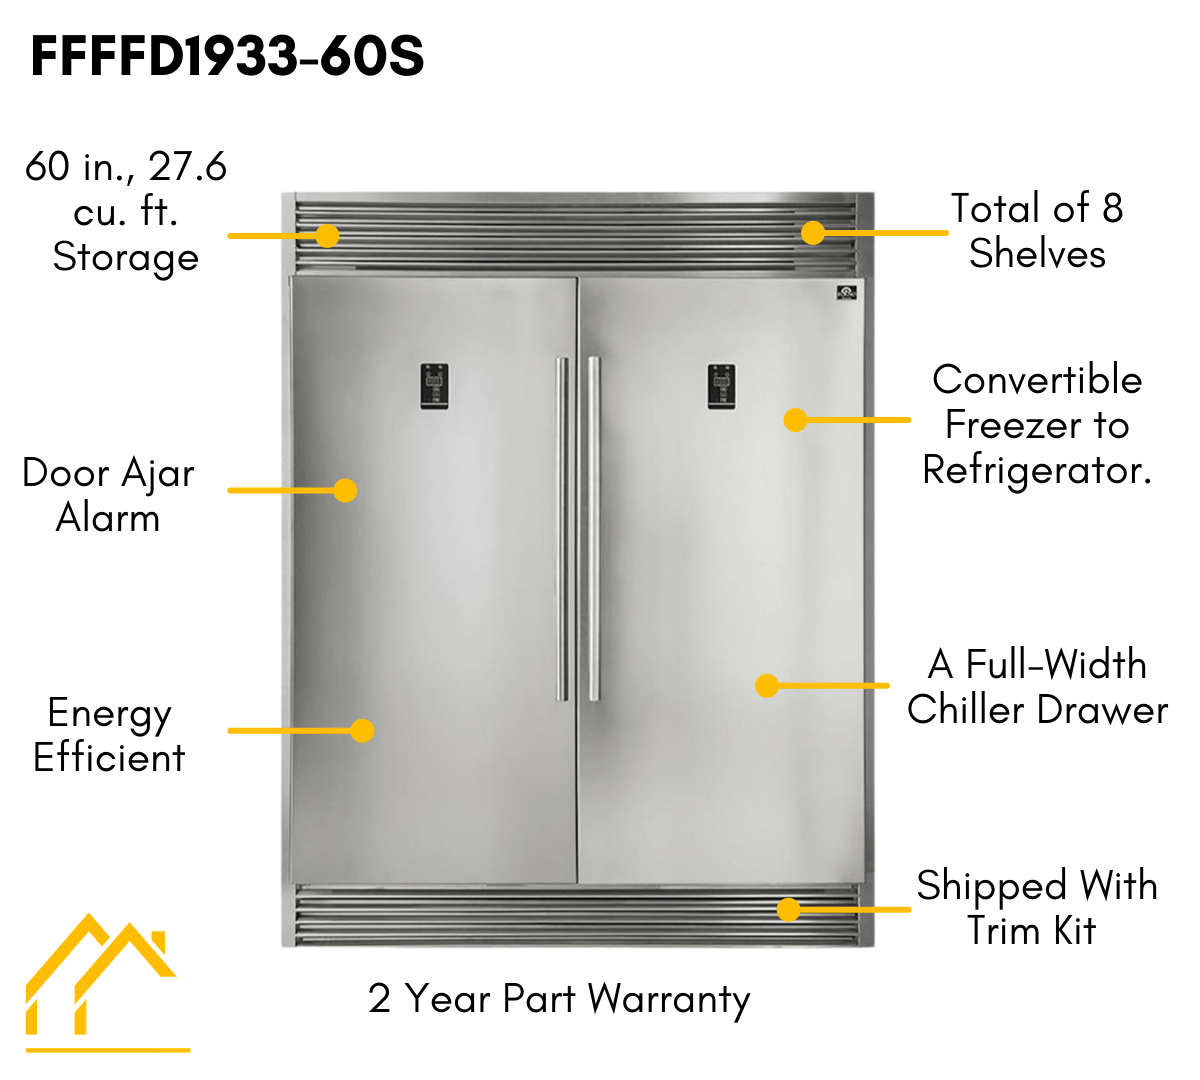 Forno Appliance Package - 36 Inch Gas Burner/Electric Oven Pro Range, Wall Mount Range Hood, Refrigerator, AP-FFSGS6187-36-W-4 Appliance Package AP-FFSGS6187-36-W-4 Luxury Appliances Direct